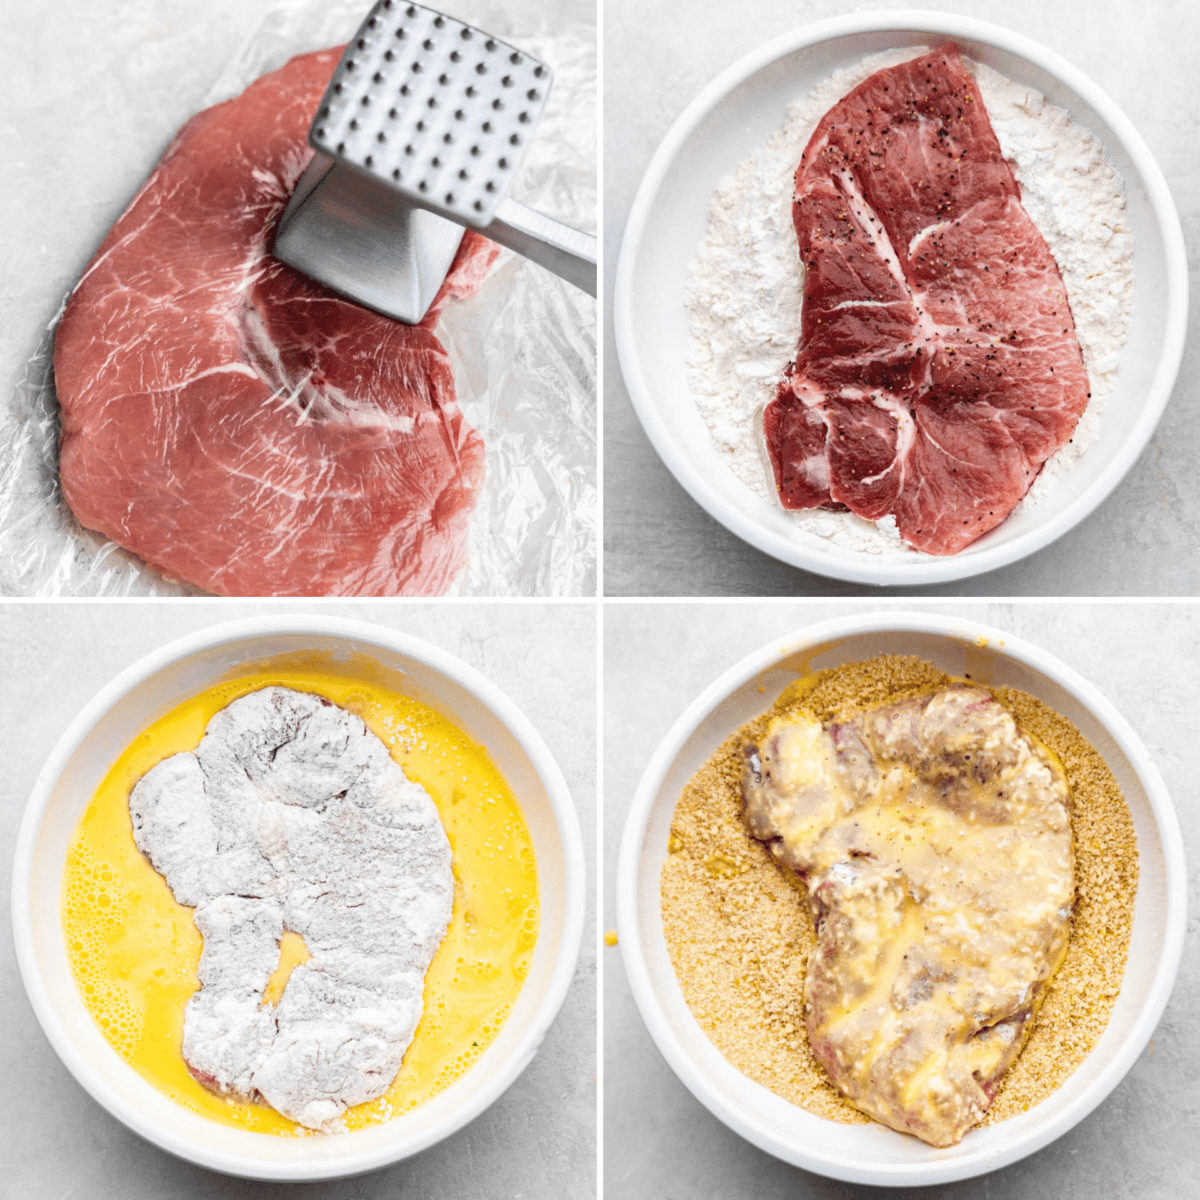 A collage image showing the process for pounding out pork chops to make german schnitzel.